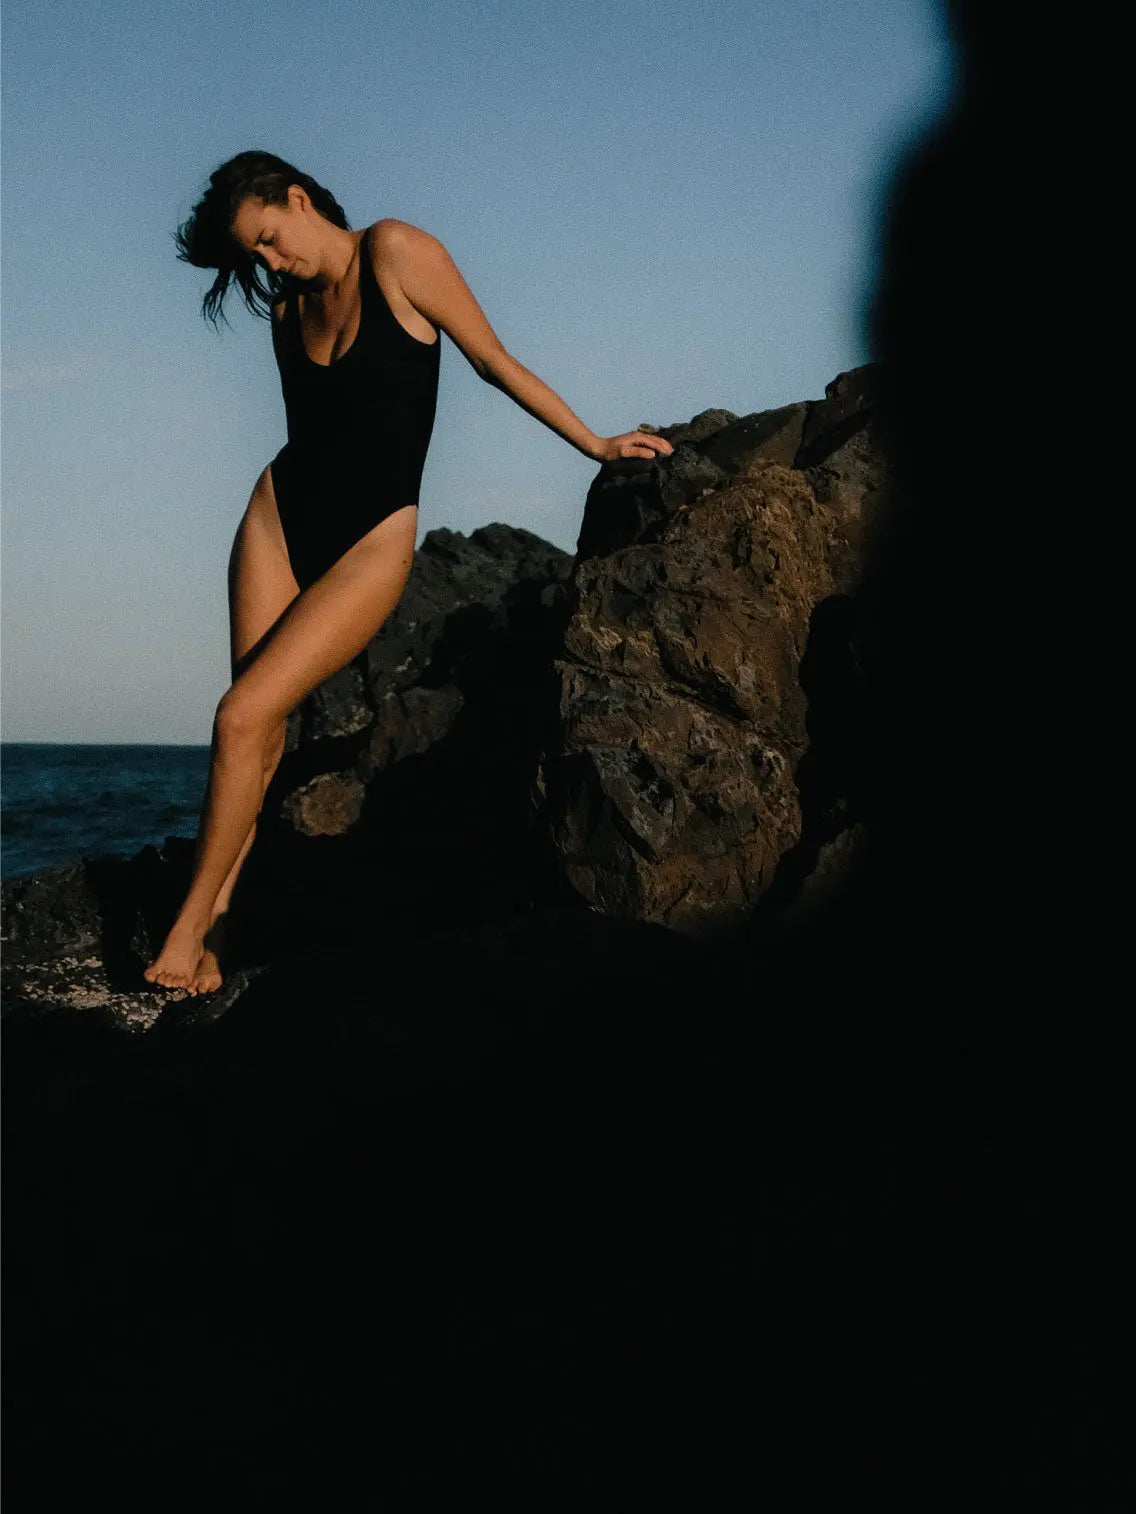 A Black Contrast One Piece Swimwear with wide shoulder straps and a scoop neckline from Innes Lauren in Barcelona. The swimsuit features simple, clean lines and a fitted design, with subtle horizontal stitching detail across the chest area. The fabric appears smooth and stretchy.